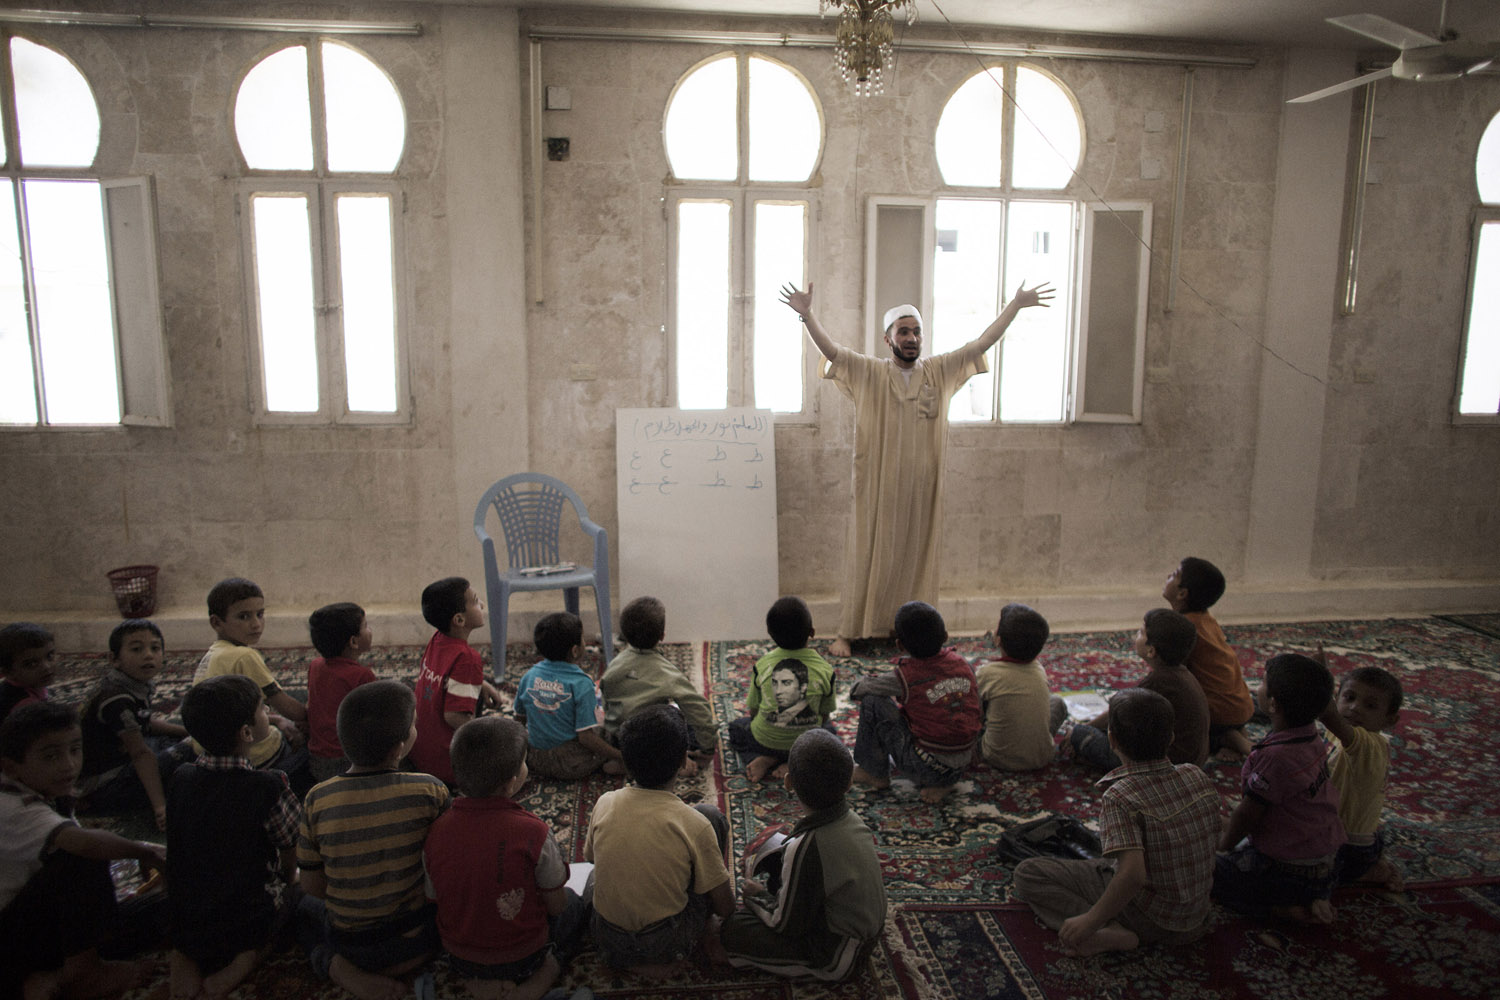 Sept. 17, 2012. Syrian teacher Abu al-Fattah gestures while delivering a lesson at an improvised school in the town of Azaz, Syria, on the border with Turkey.